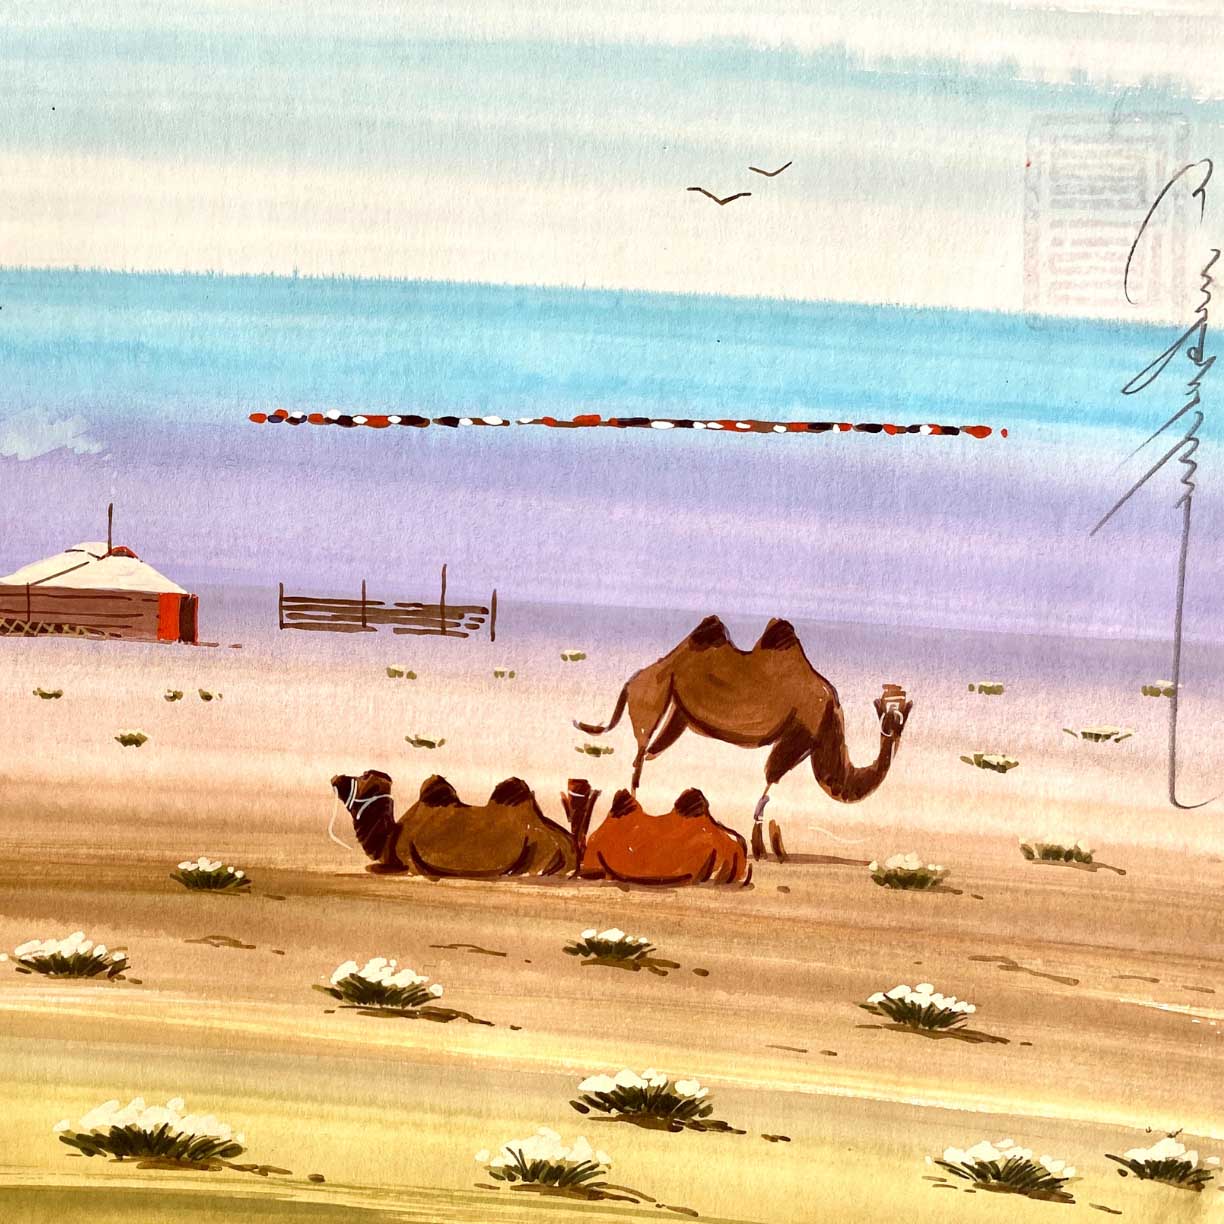 Camels by Found Art-Found Art-Poster Child Prints